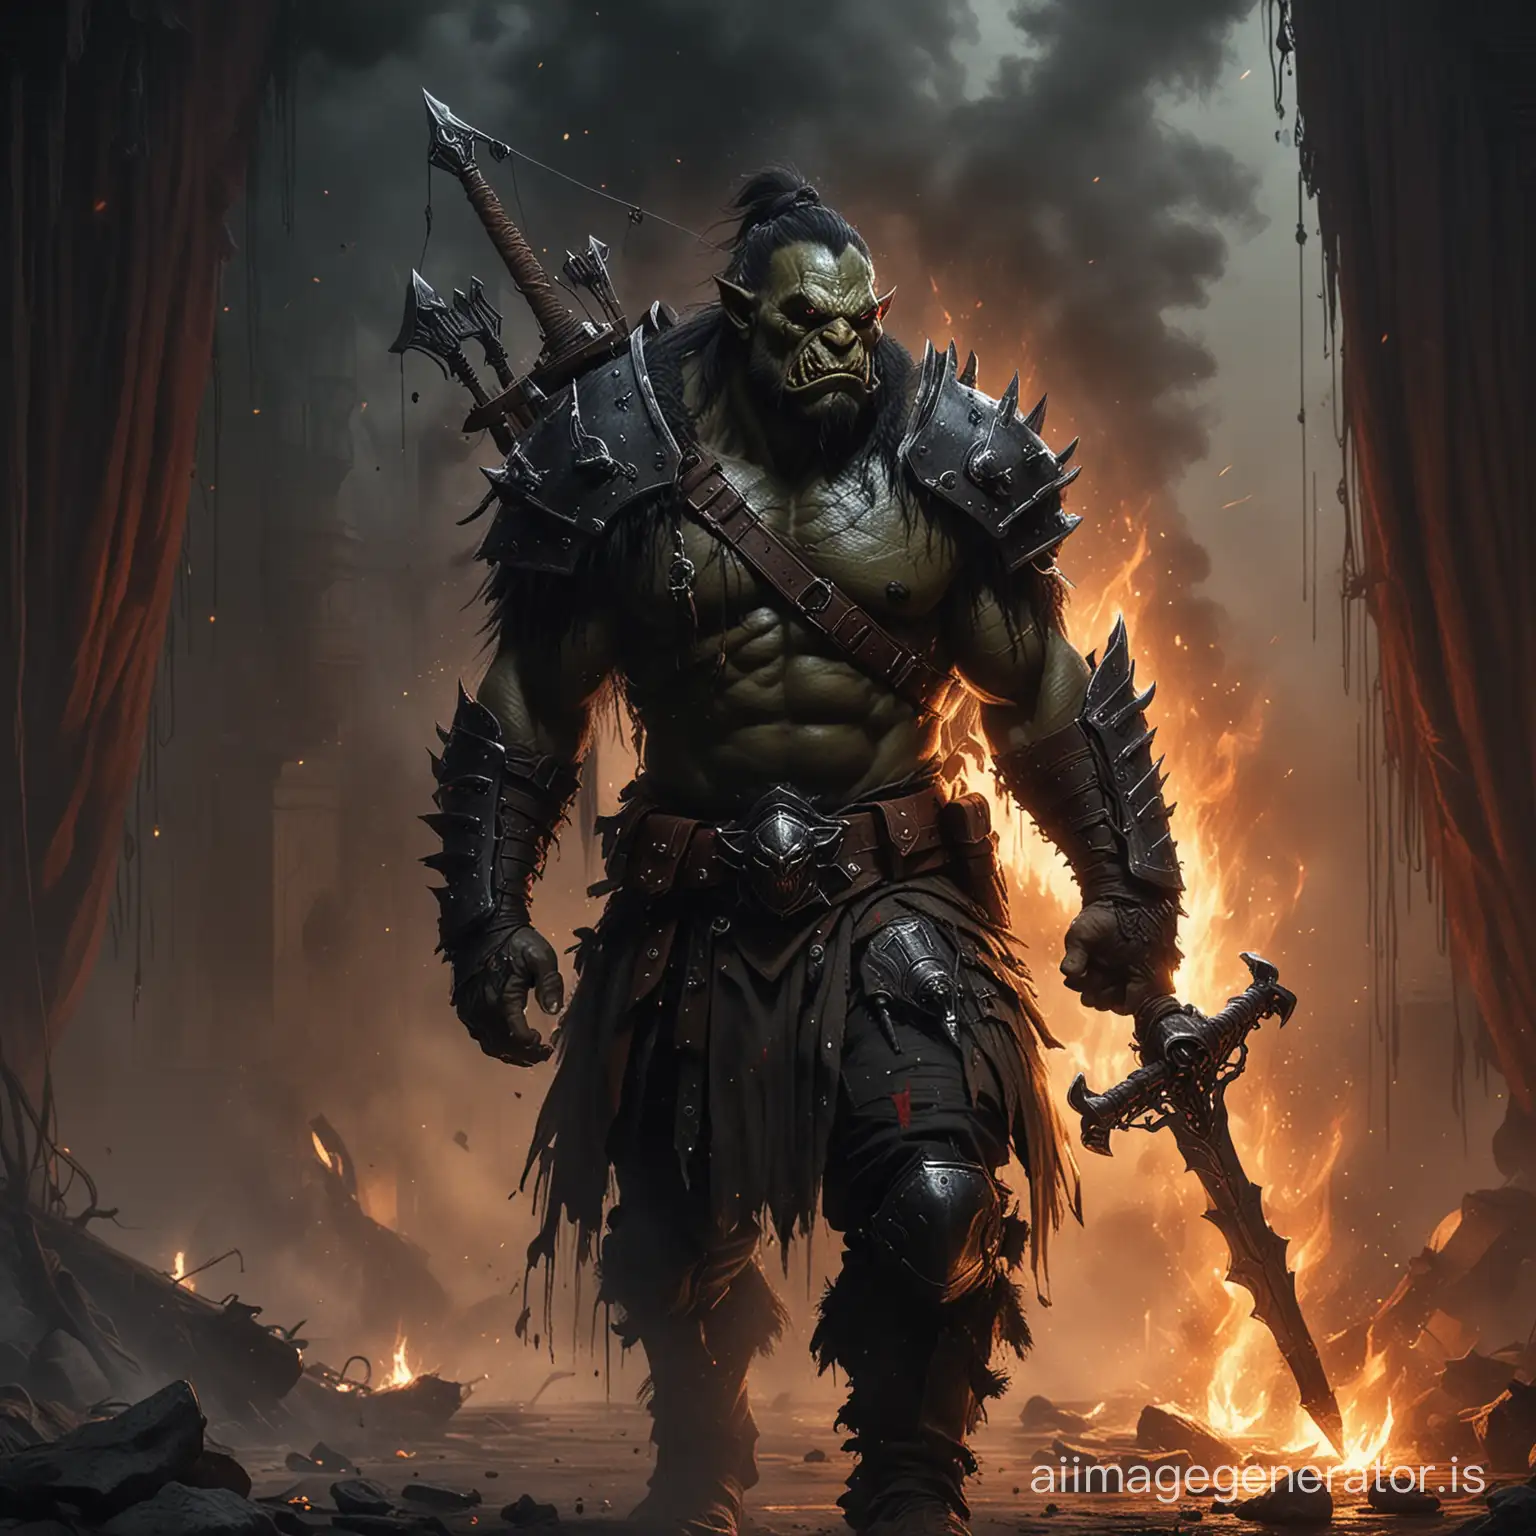 In a mesmerizing display of splashing brushstrokes, an intricate realistic digital painting masterpiece emerges. An orc, dressed in dark armor and carrying two swords in his belt, a crossbow on his back, against a backdrop of fire curtains surrounded by black smoke and a dark atmosphere of candlelight that reveals his obscured figure and emotional intensity. Ethereal, otherworldly, incredible detail, 